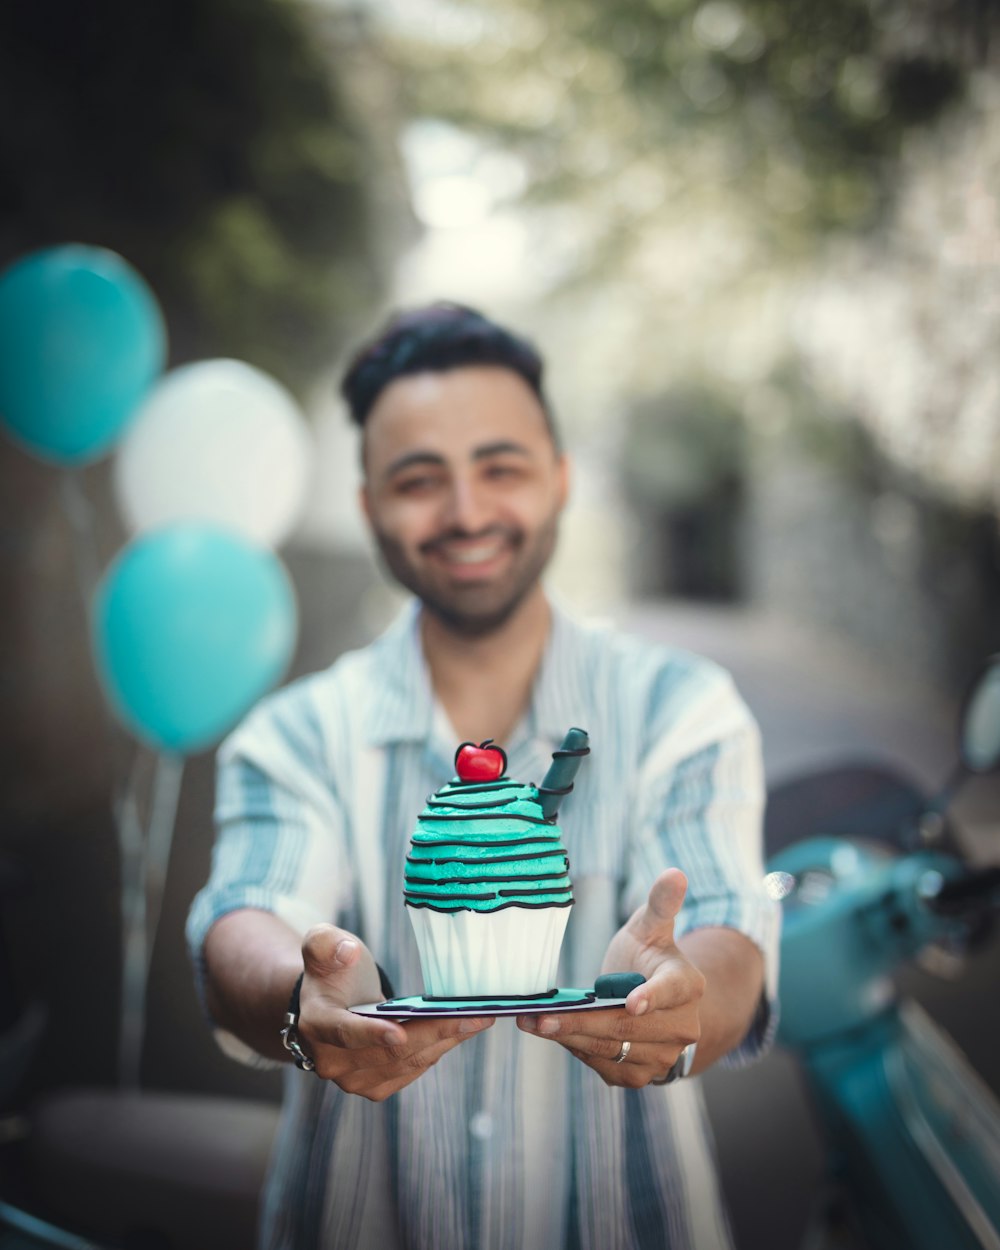 a man holding a plate with a cupcake on it